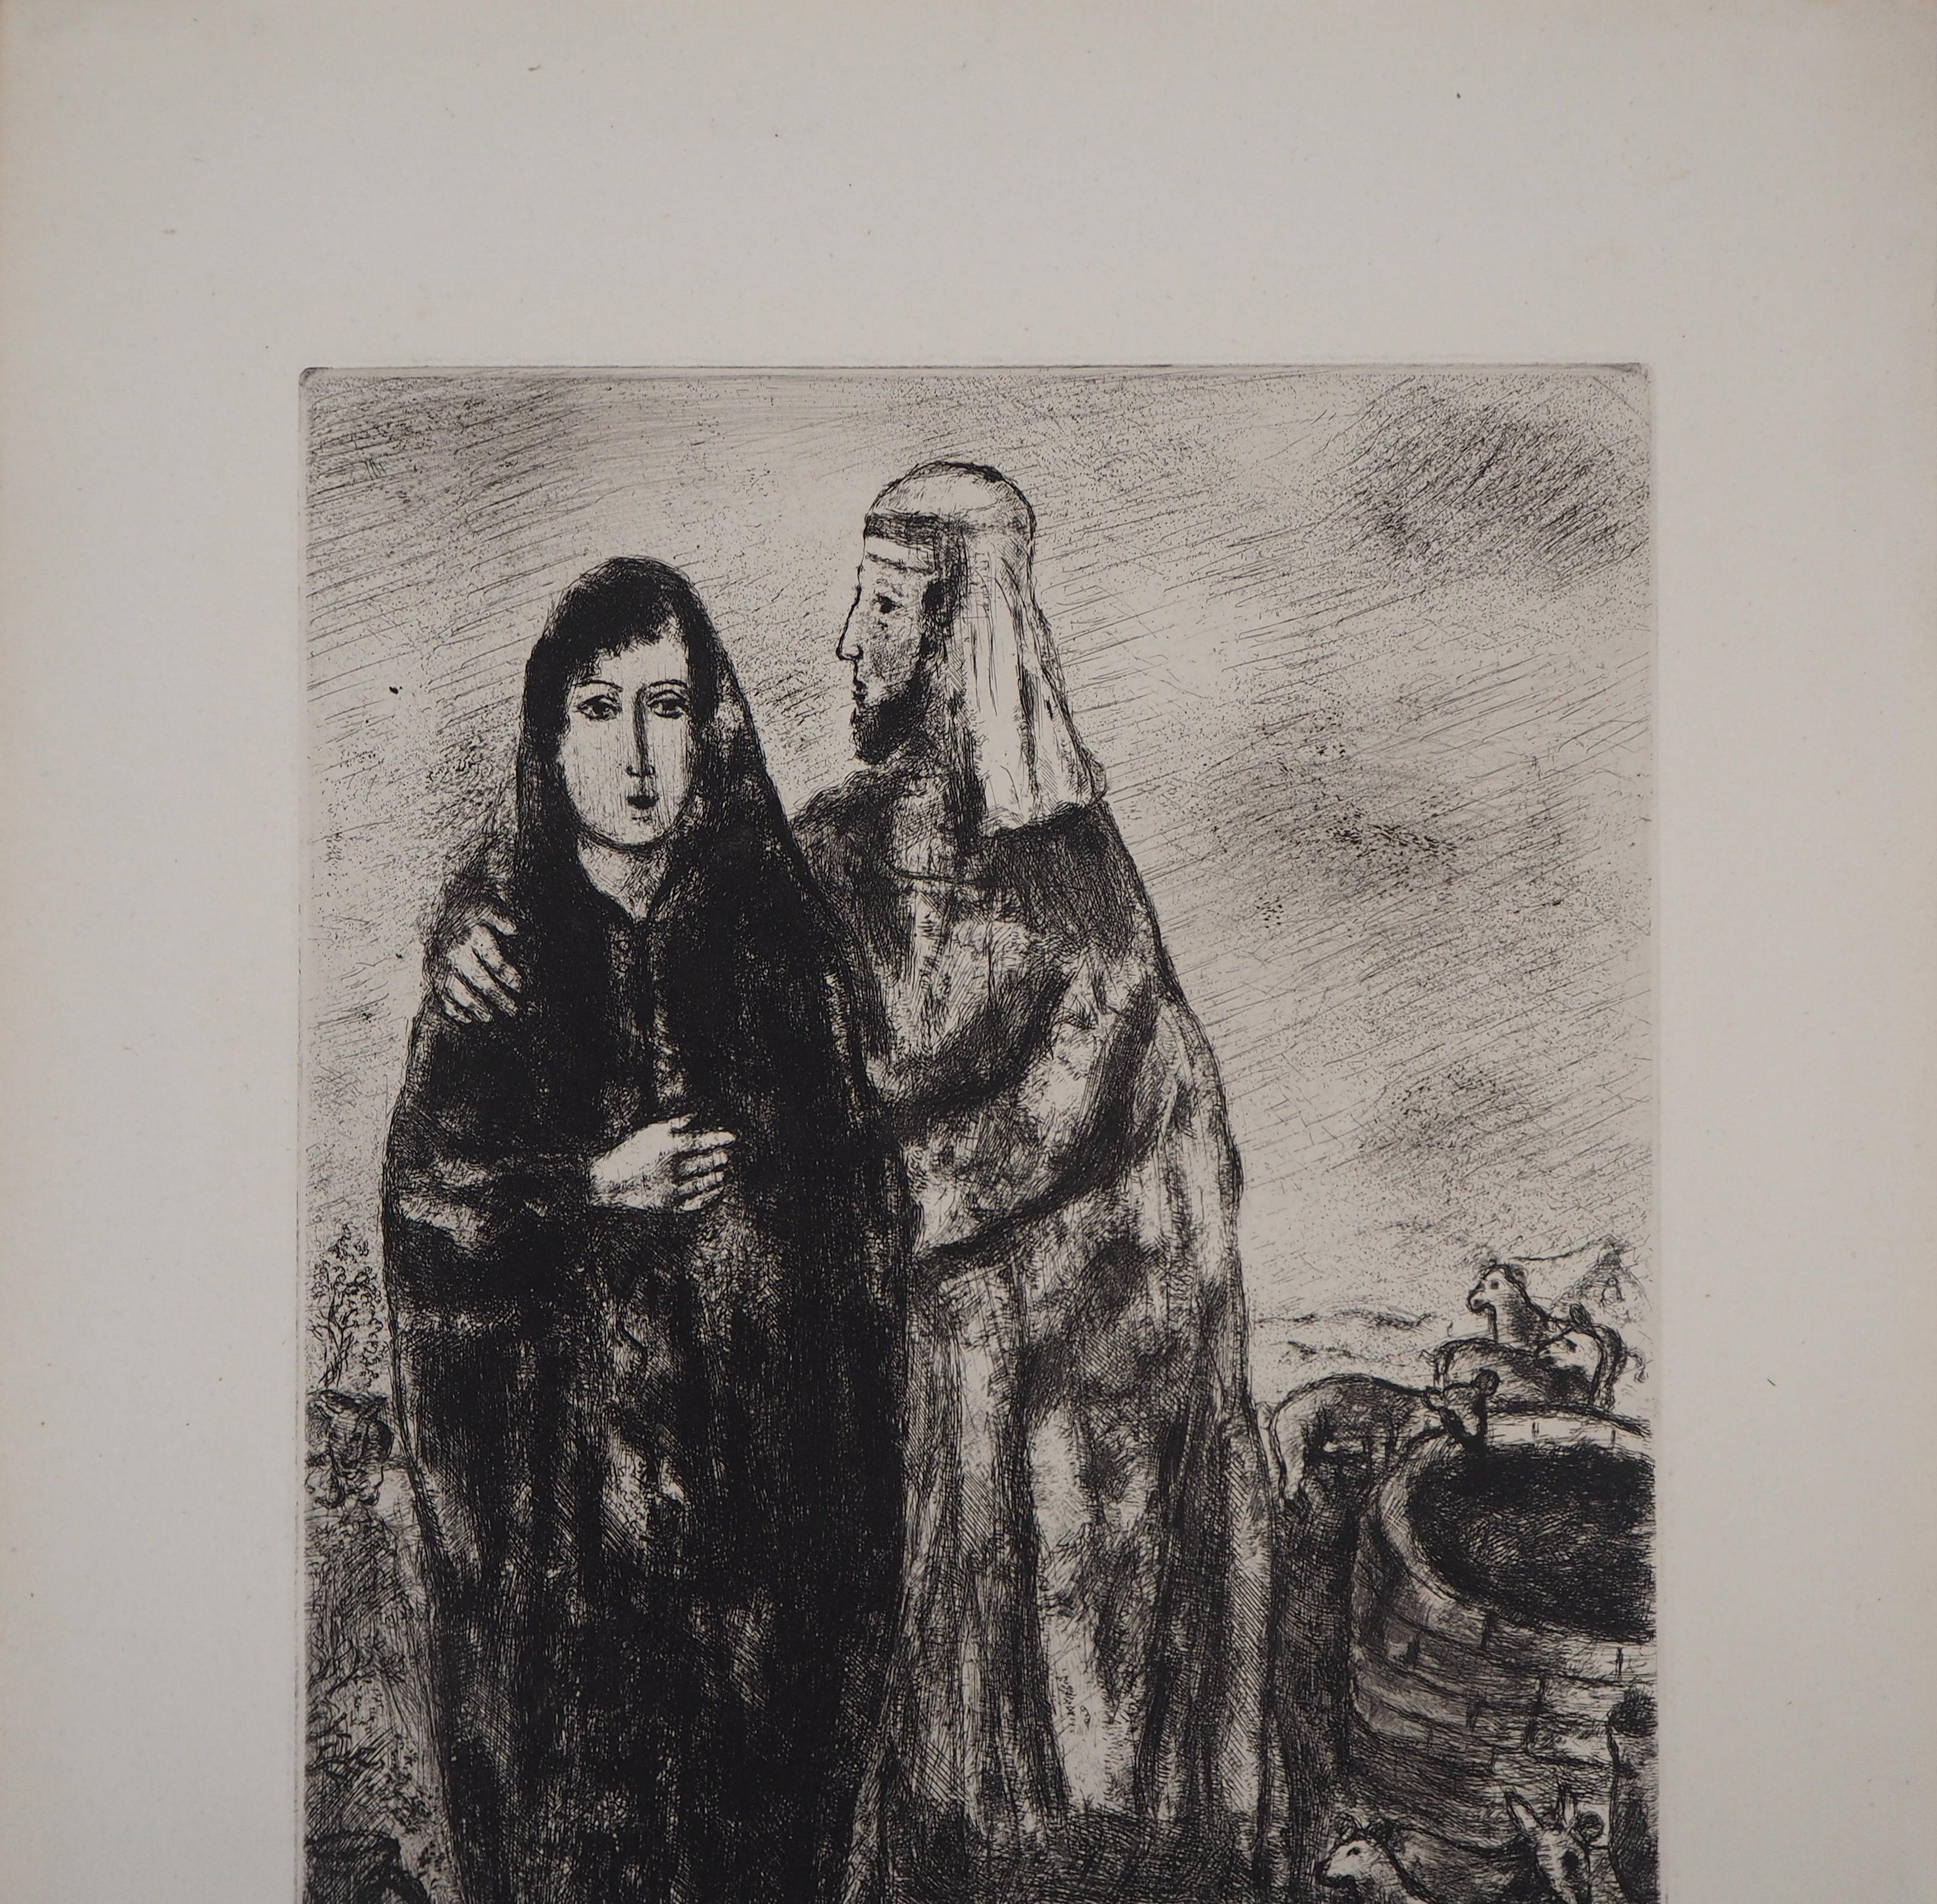 Marc Chagall (1887-1958)
Bible: The Meeting of Rachel and Jacob (Rencontre de Rachel et Jacob), 1958

Original etching
Printed signature in the plate
On Montval vellum, 44 x 33 cm (c. 17.3 x 12.9 inch)

INFORMATION: Published by Vollard / Tériade in